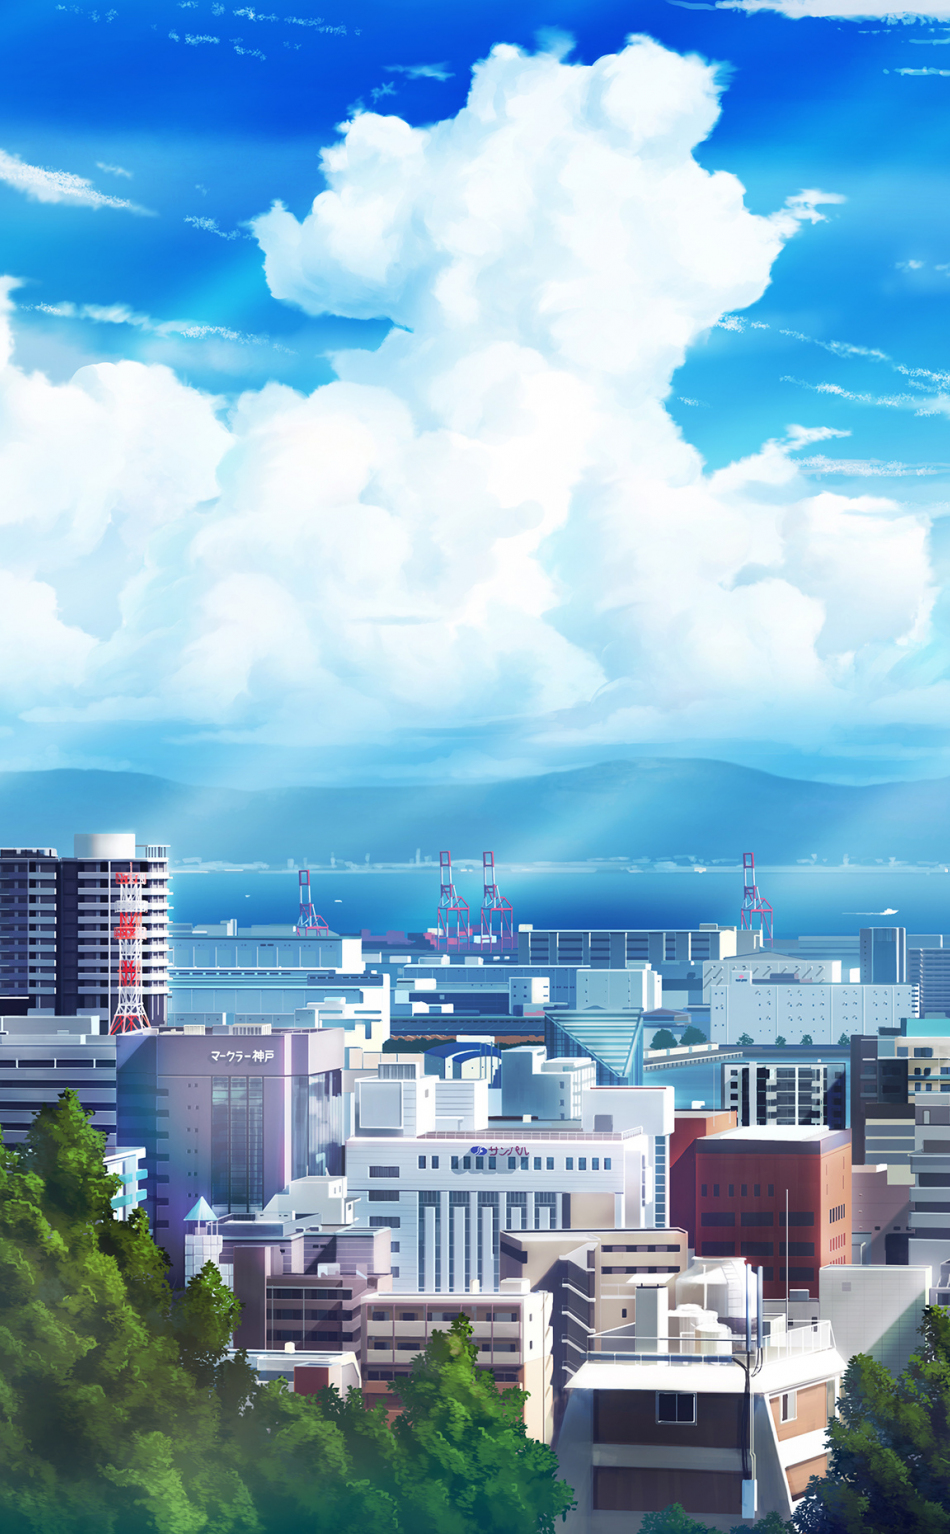 21545 Japanese Anime City  Android iPhone Desktop HD Backgrounds   Wallpapers 1080p 4k HD Wallpapers Desktop Background  Android  iPhone  1080p 4k 1080x1828 2023